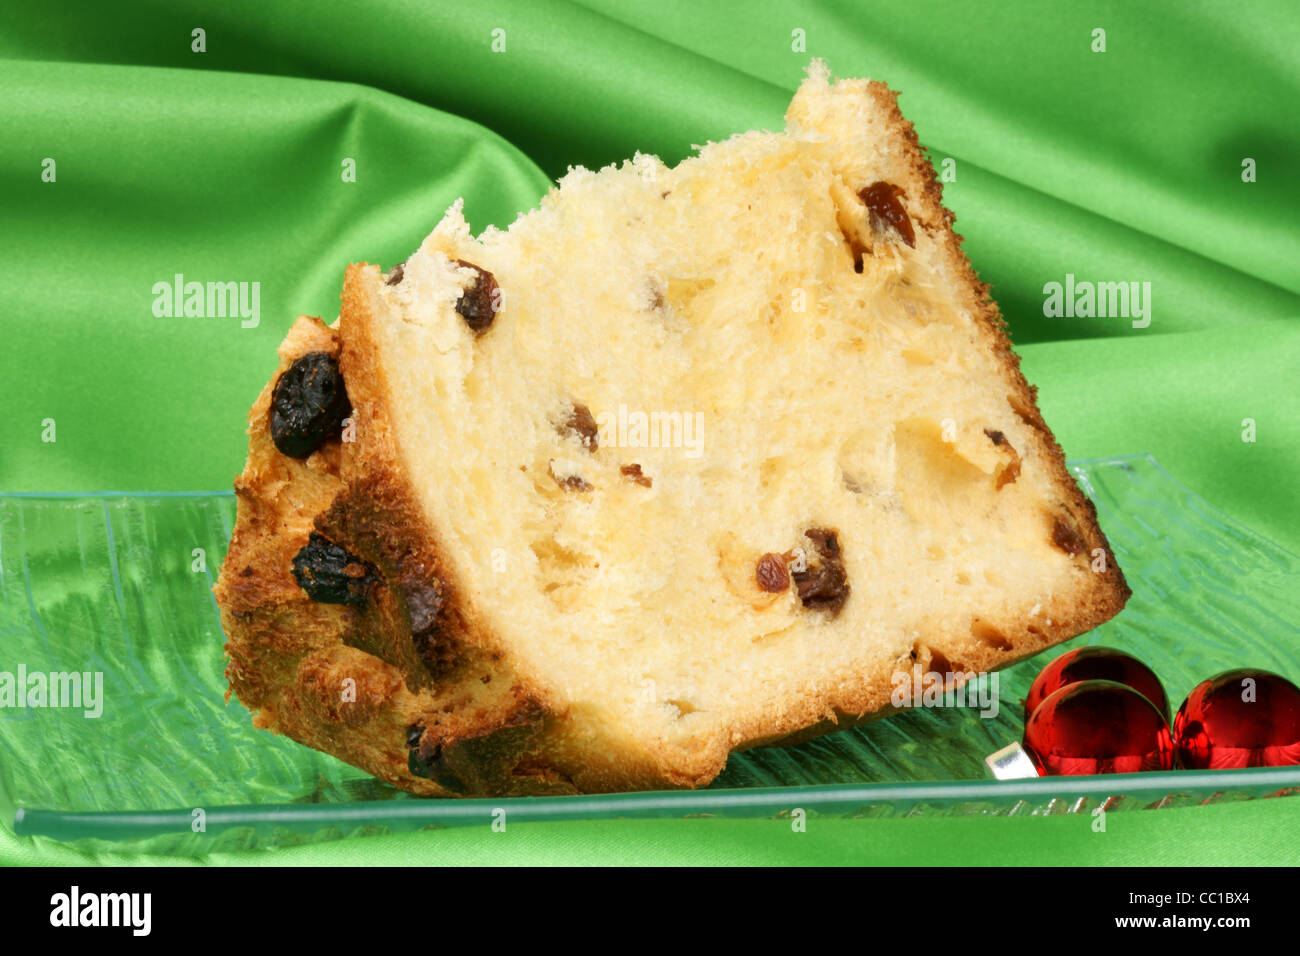 Panettone the italian Christmas fruit cake served on a transparent glass plate with some red glass ornaments. Stock Photo